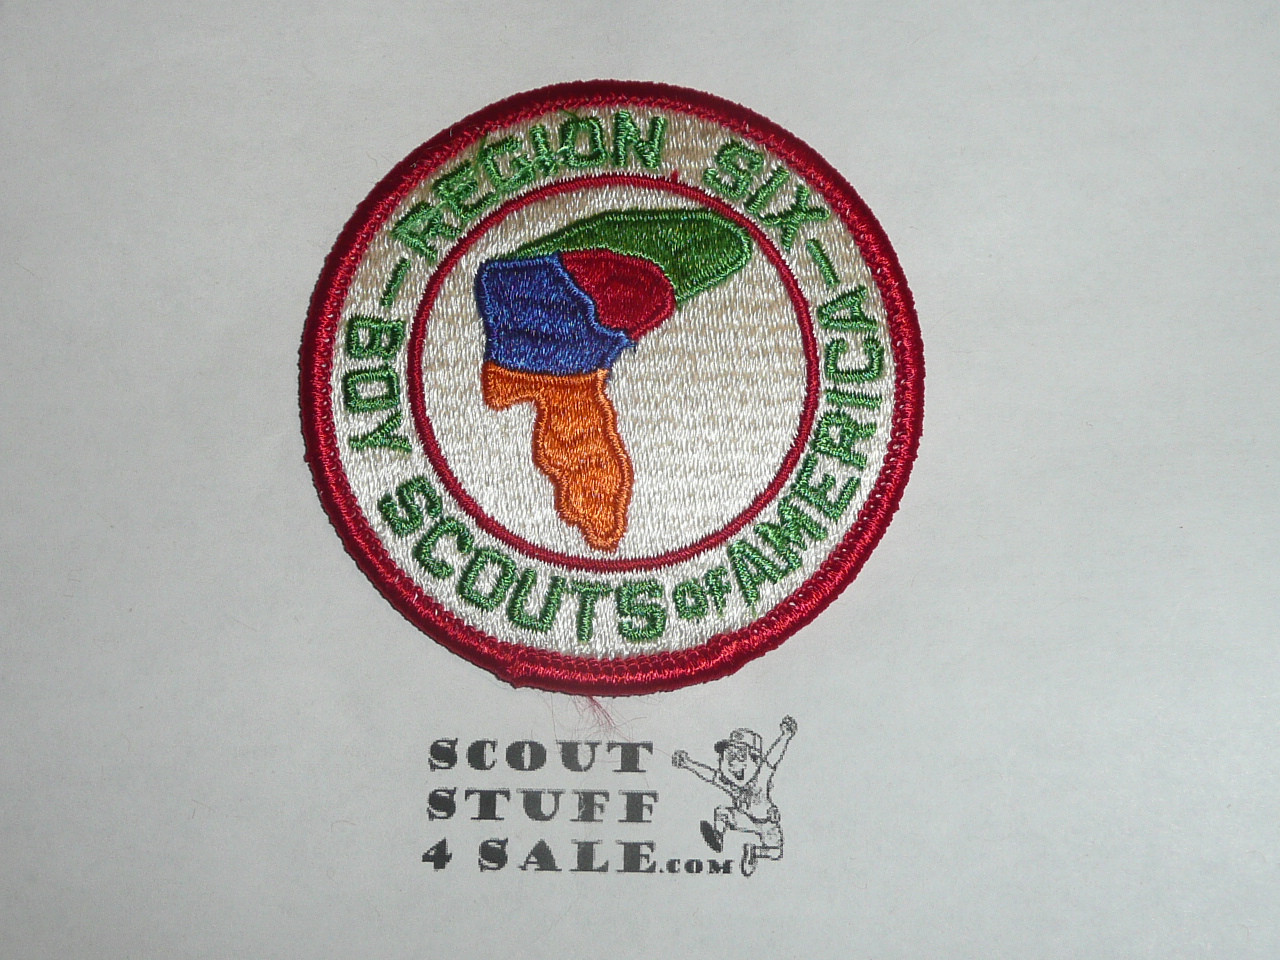 Region 6 rolled edge Twill Patch - PB Reproduction